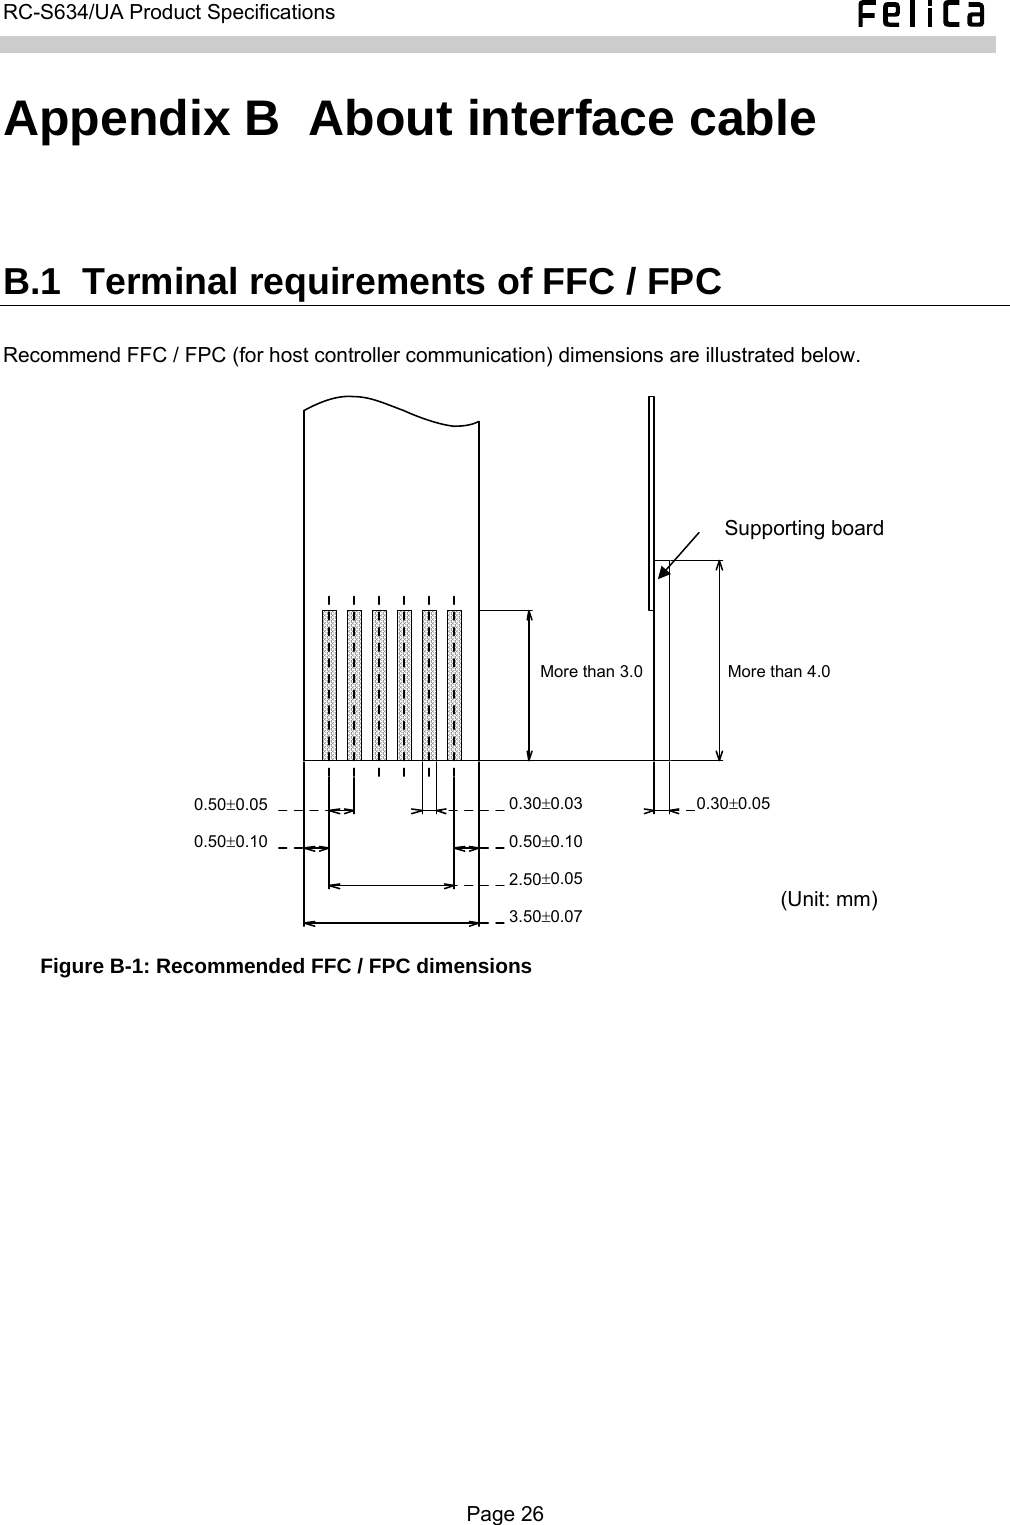   RC-S634/UA Product Specifications  Appendix B  About interface cable B.1  Terminal requirements of FFC / FPC Recommend FFC / FPC (for host controller communication) dimensions are illustrated below. (Unit: mm) Supporting board 3.50±0.07 More than 3.0 More than 4.0 0.30±0.05 0.30±0.03 0.50±0.10 2.50±0.05 0.50±0.050.50±0.10 Figure B-1: Recommended FFC / FPC dimensions   Page 26  